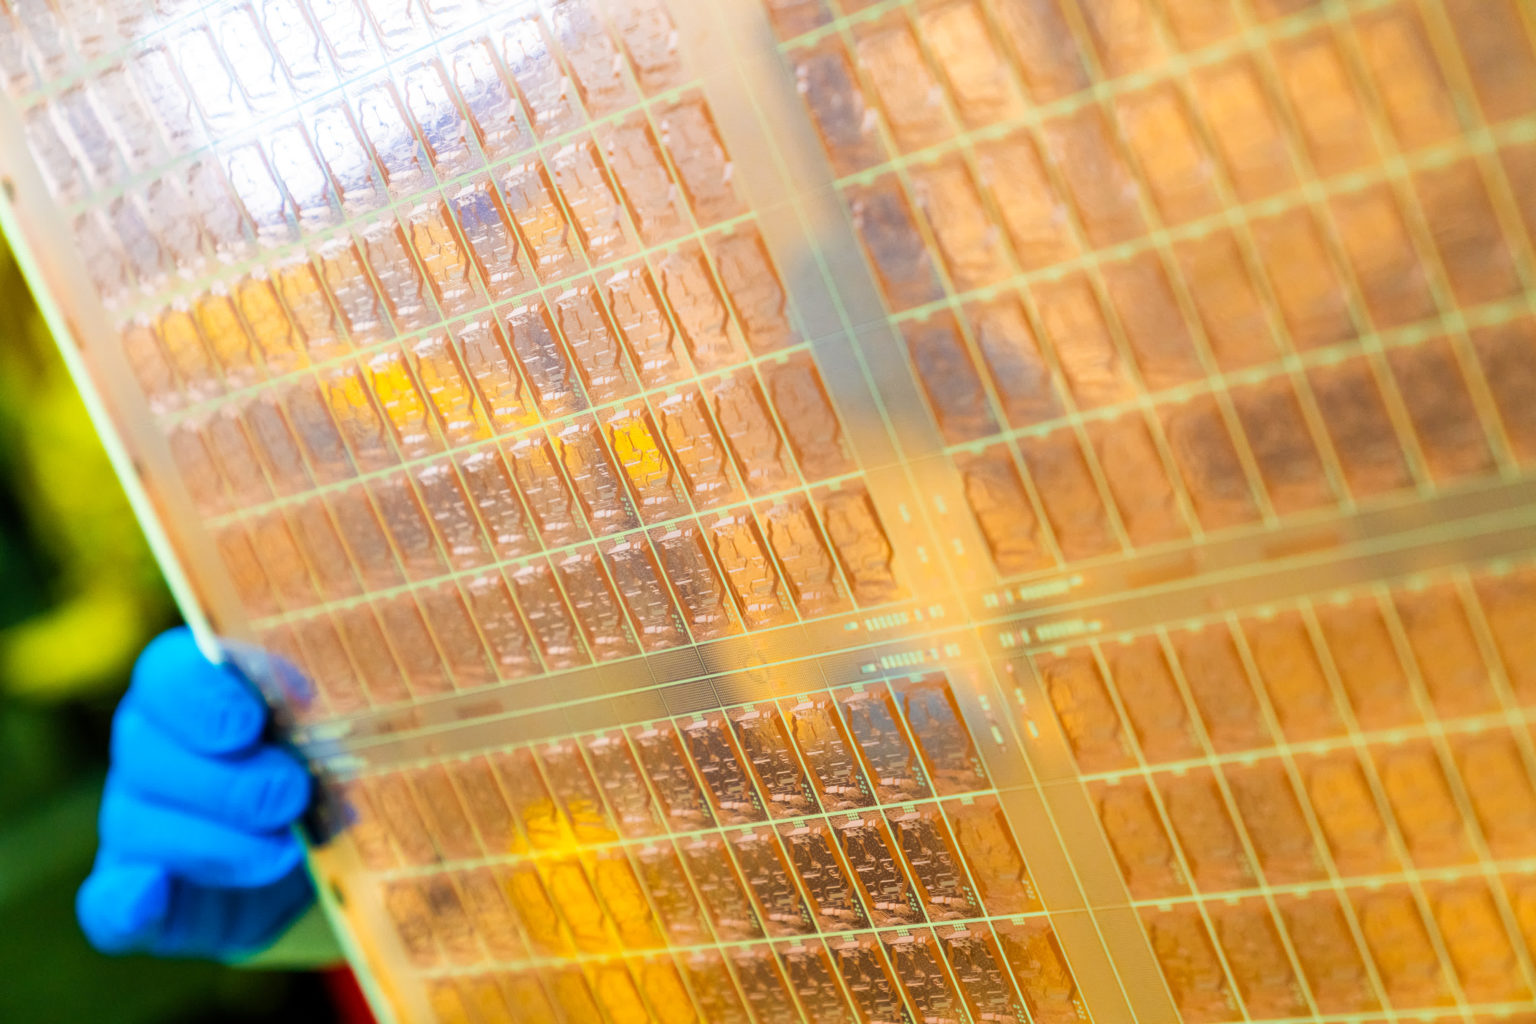 Intel shows off glass substrates for next-generation advanced chip packages